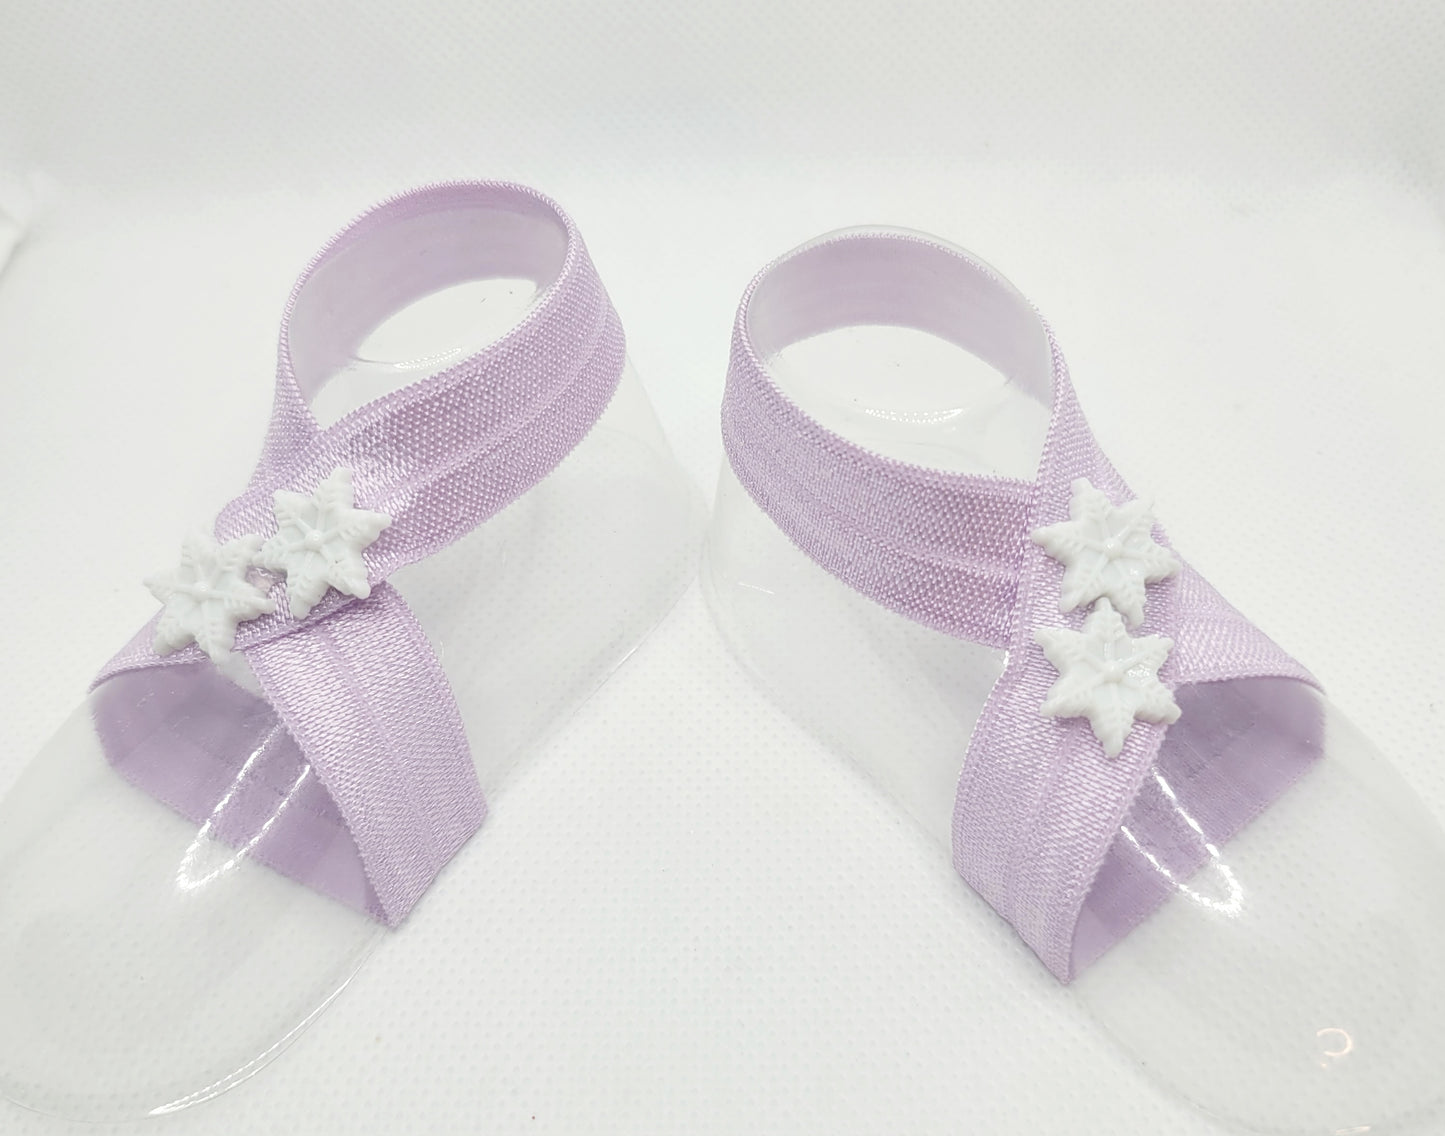 Lavender Snowflake Barefoot Sandals for Christmas Holiday